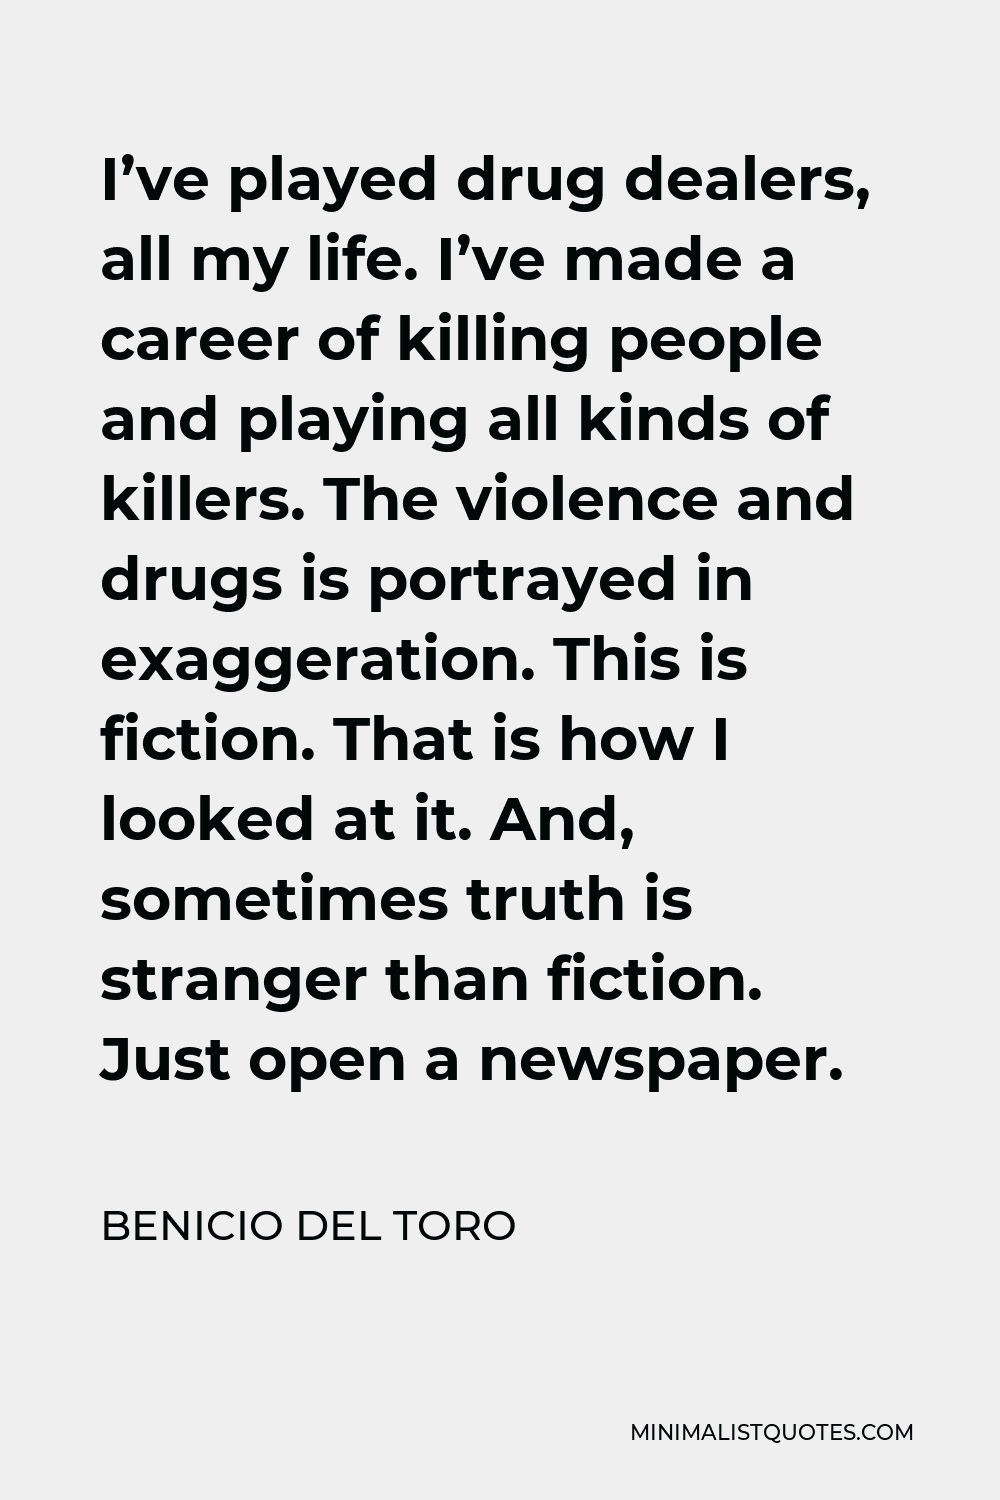 Benicio Del Toro Quote - I’ve played drug dealers, all my life. I’ve made a career of killing people and playing all kinds of killers. The violence and drugs is portrayed in exaggeration. This is fiction. That is how I looked at it. And, sometimes truth is stranger than fiction. Just open a newspaper.